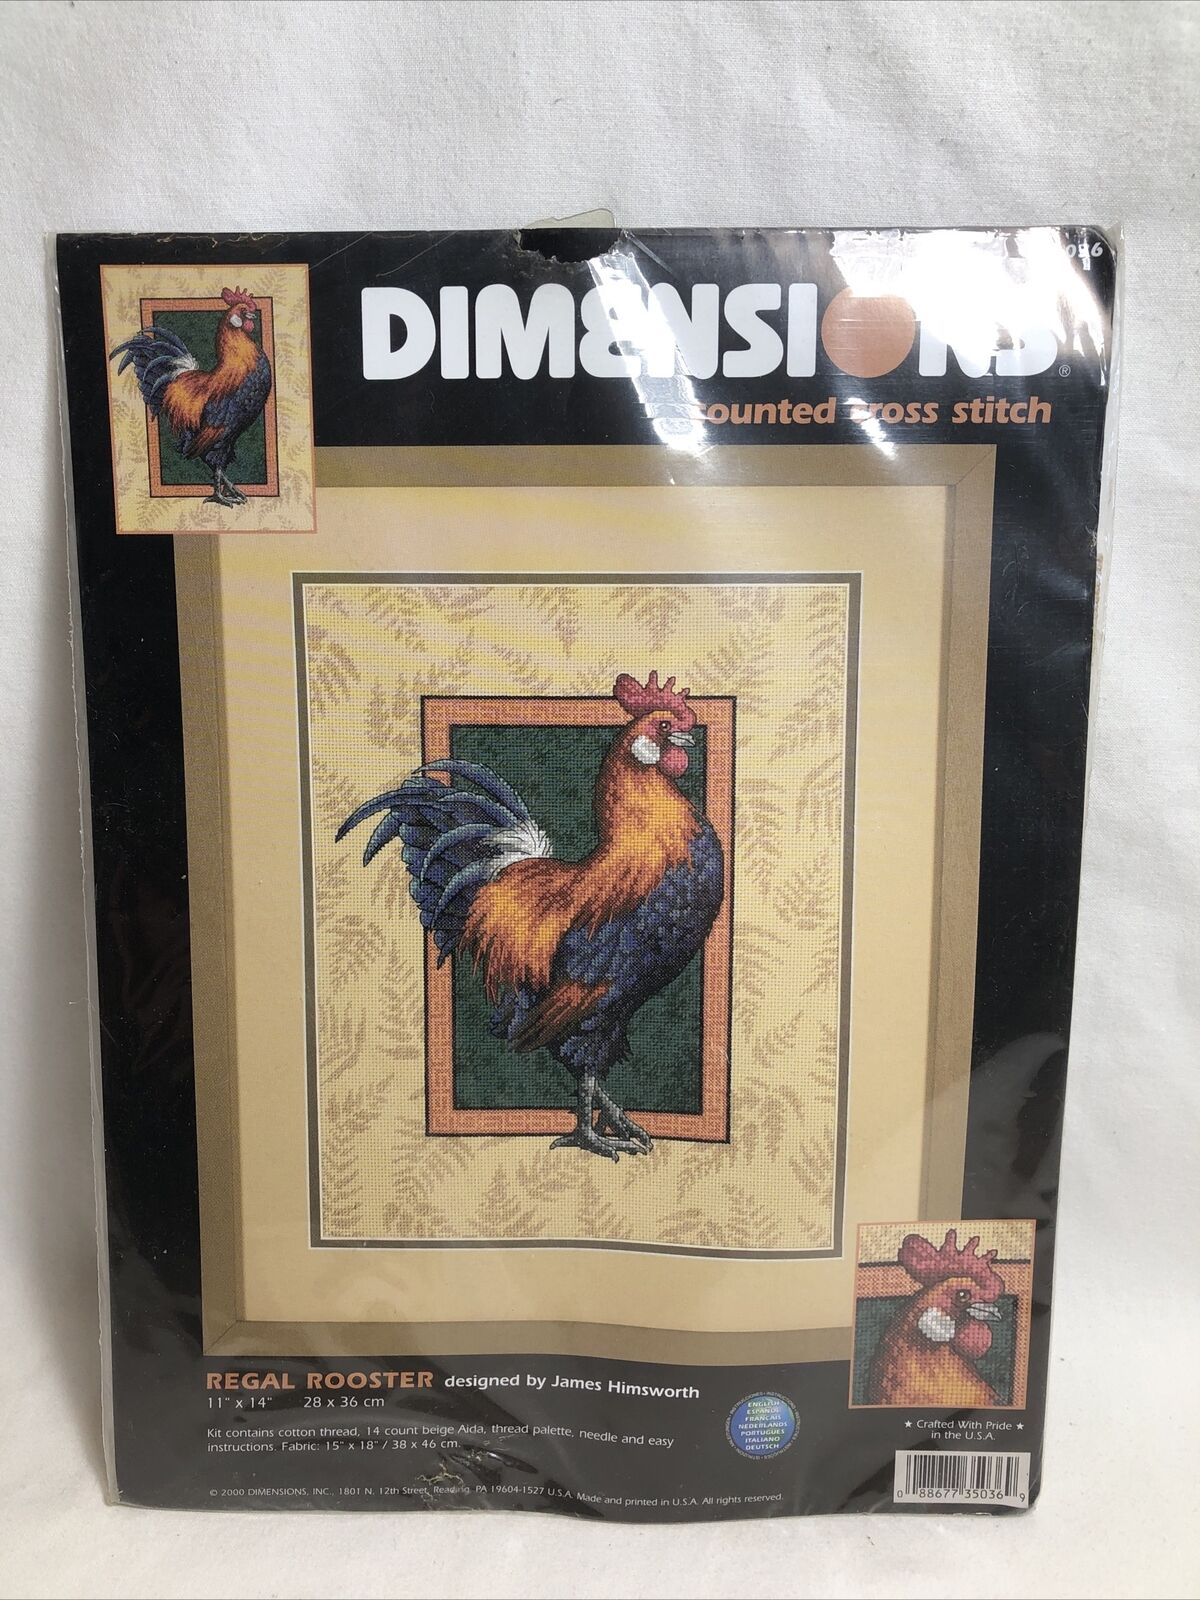 NEW - Dimensions Counted Cross Stitch Kit “REGAL ROOSTER” 35036 James Himsworth